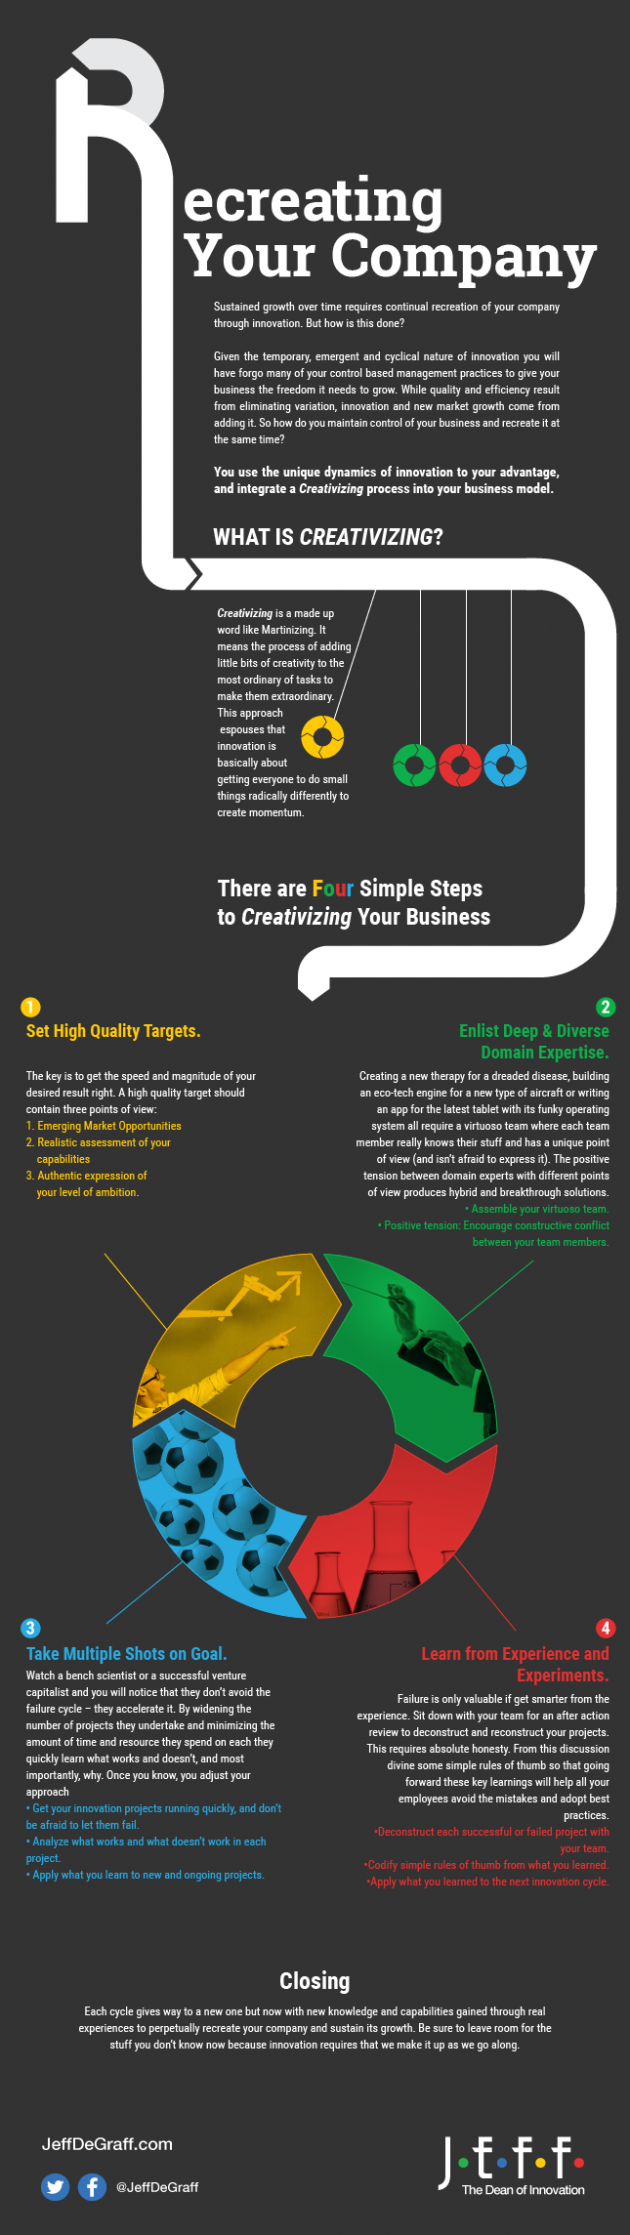 Recreating your Company Infographic